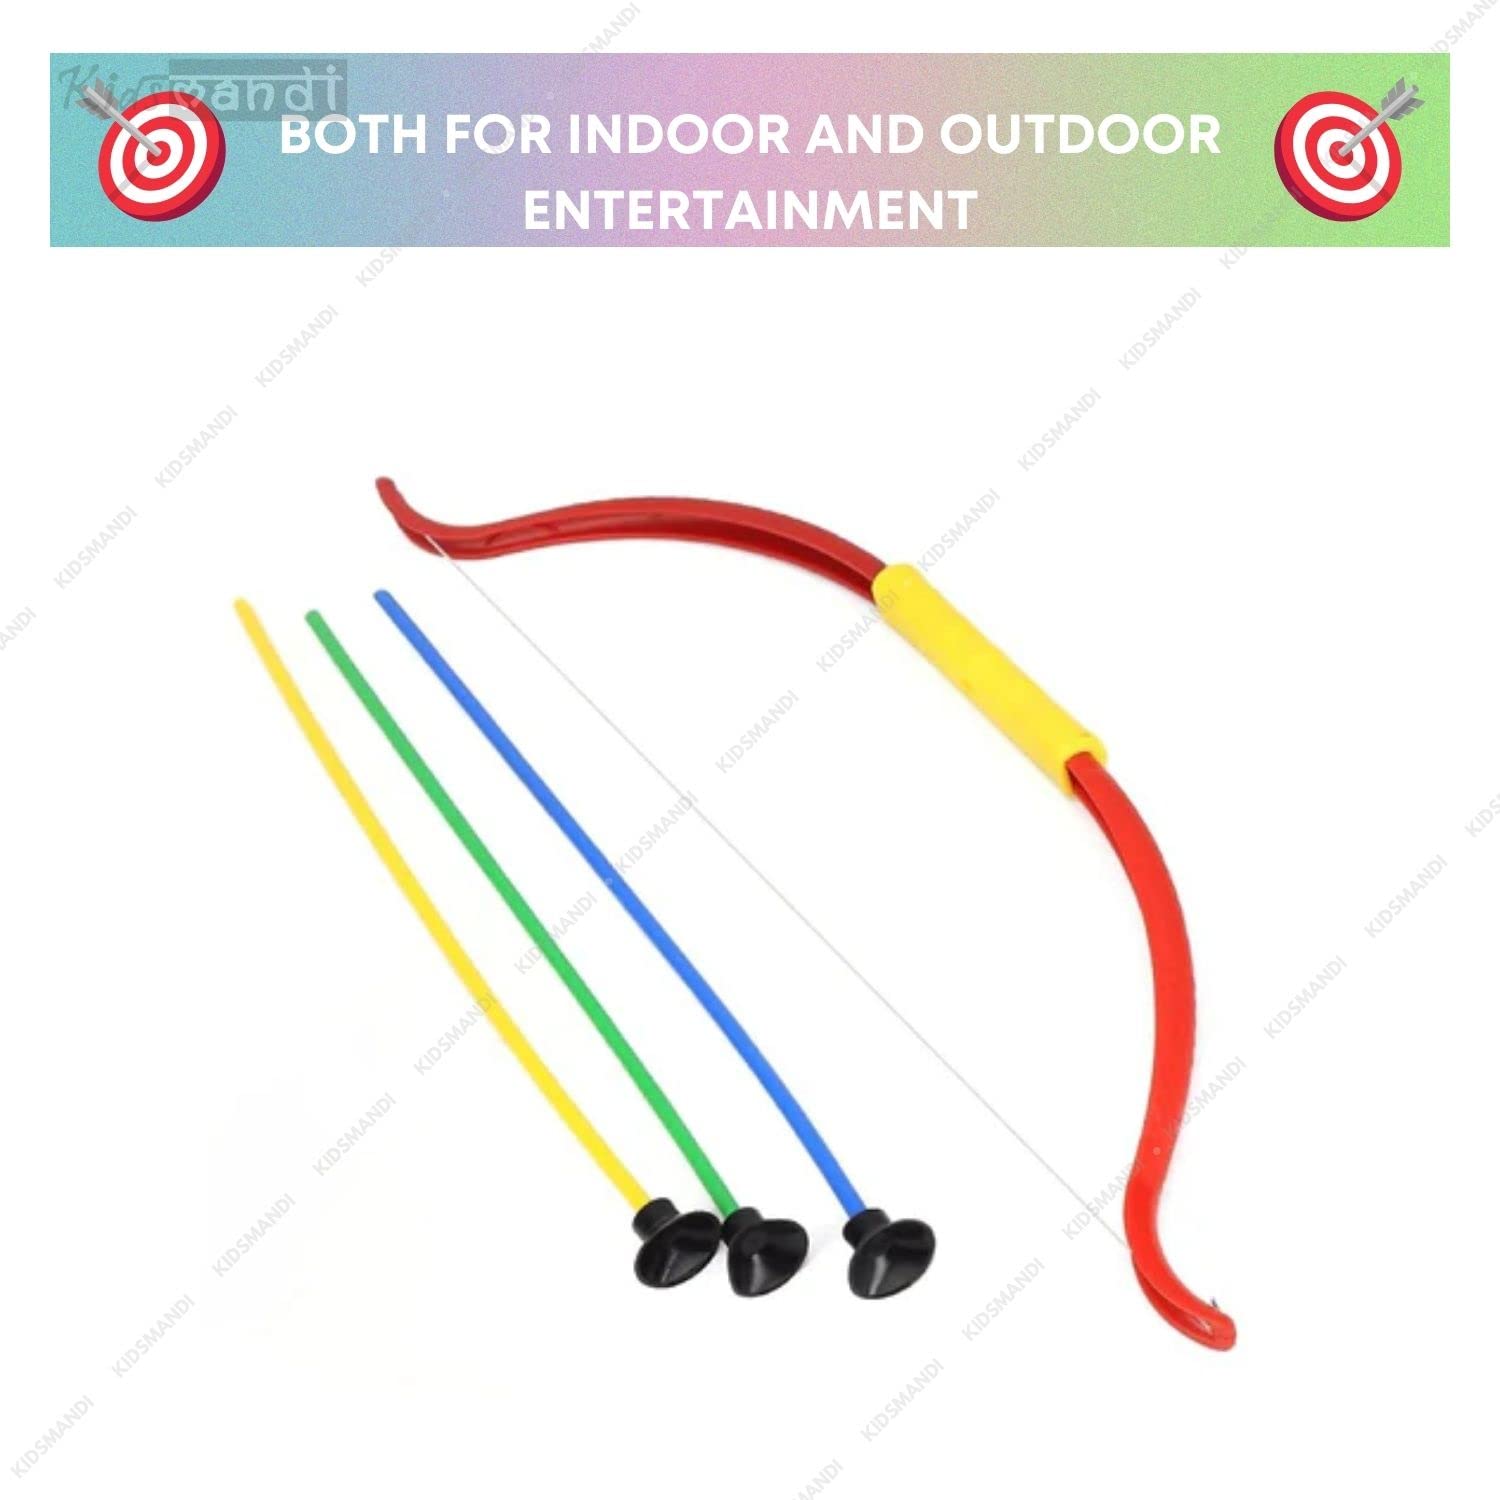 Kids Mandi plastic archery bow and arrow toy set with target board.